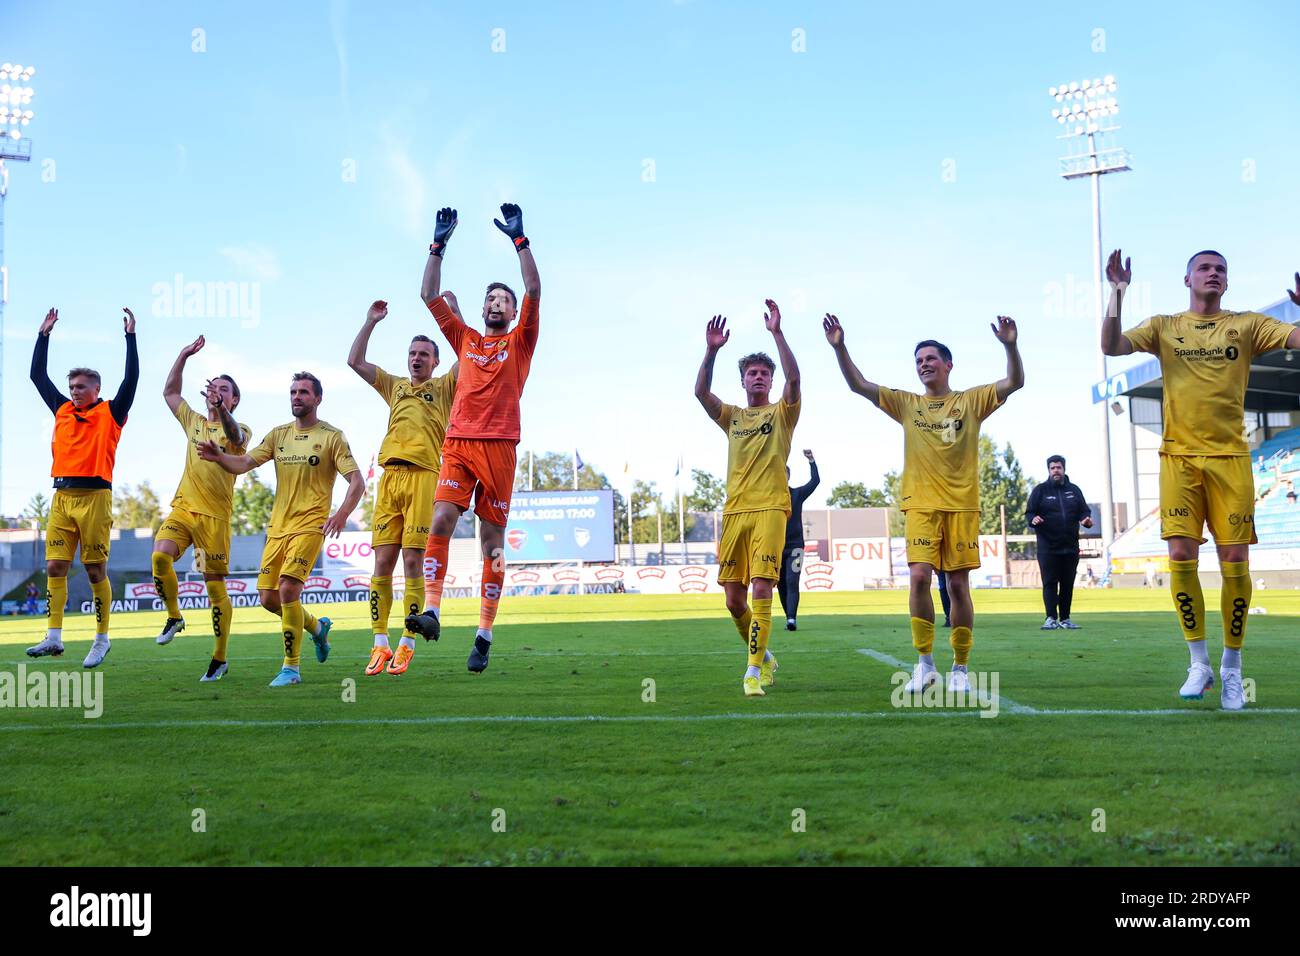 Sandefjord, Norway, 23rd July 2023. Bodø/Glimt's players celebrate after their 2-5 win in the match between Sandefjord and Bodø/Glimt at Release Arena in Sandefjord.   Credit: Frode Arnesen/Alamy Live News Stock Photo